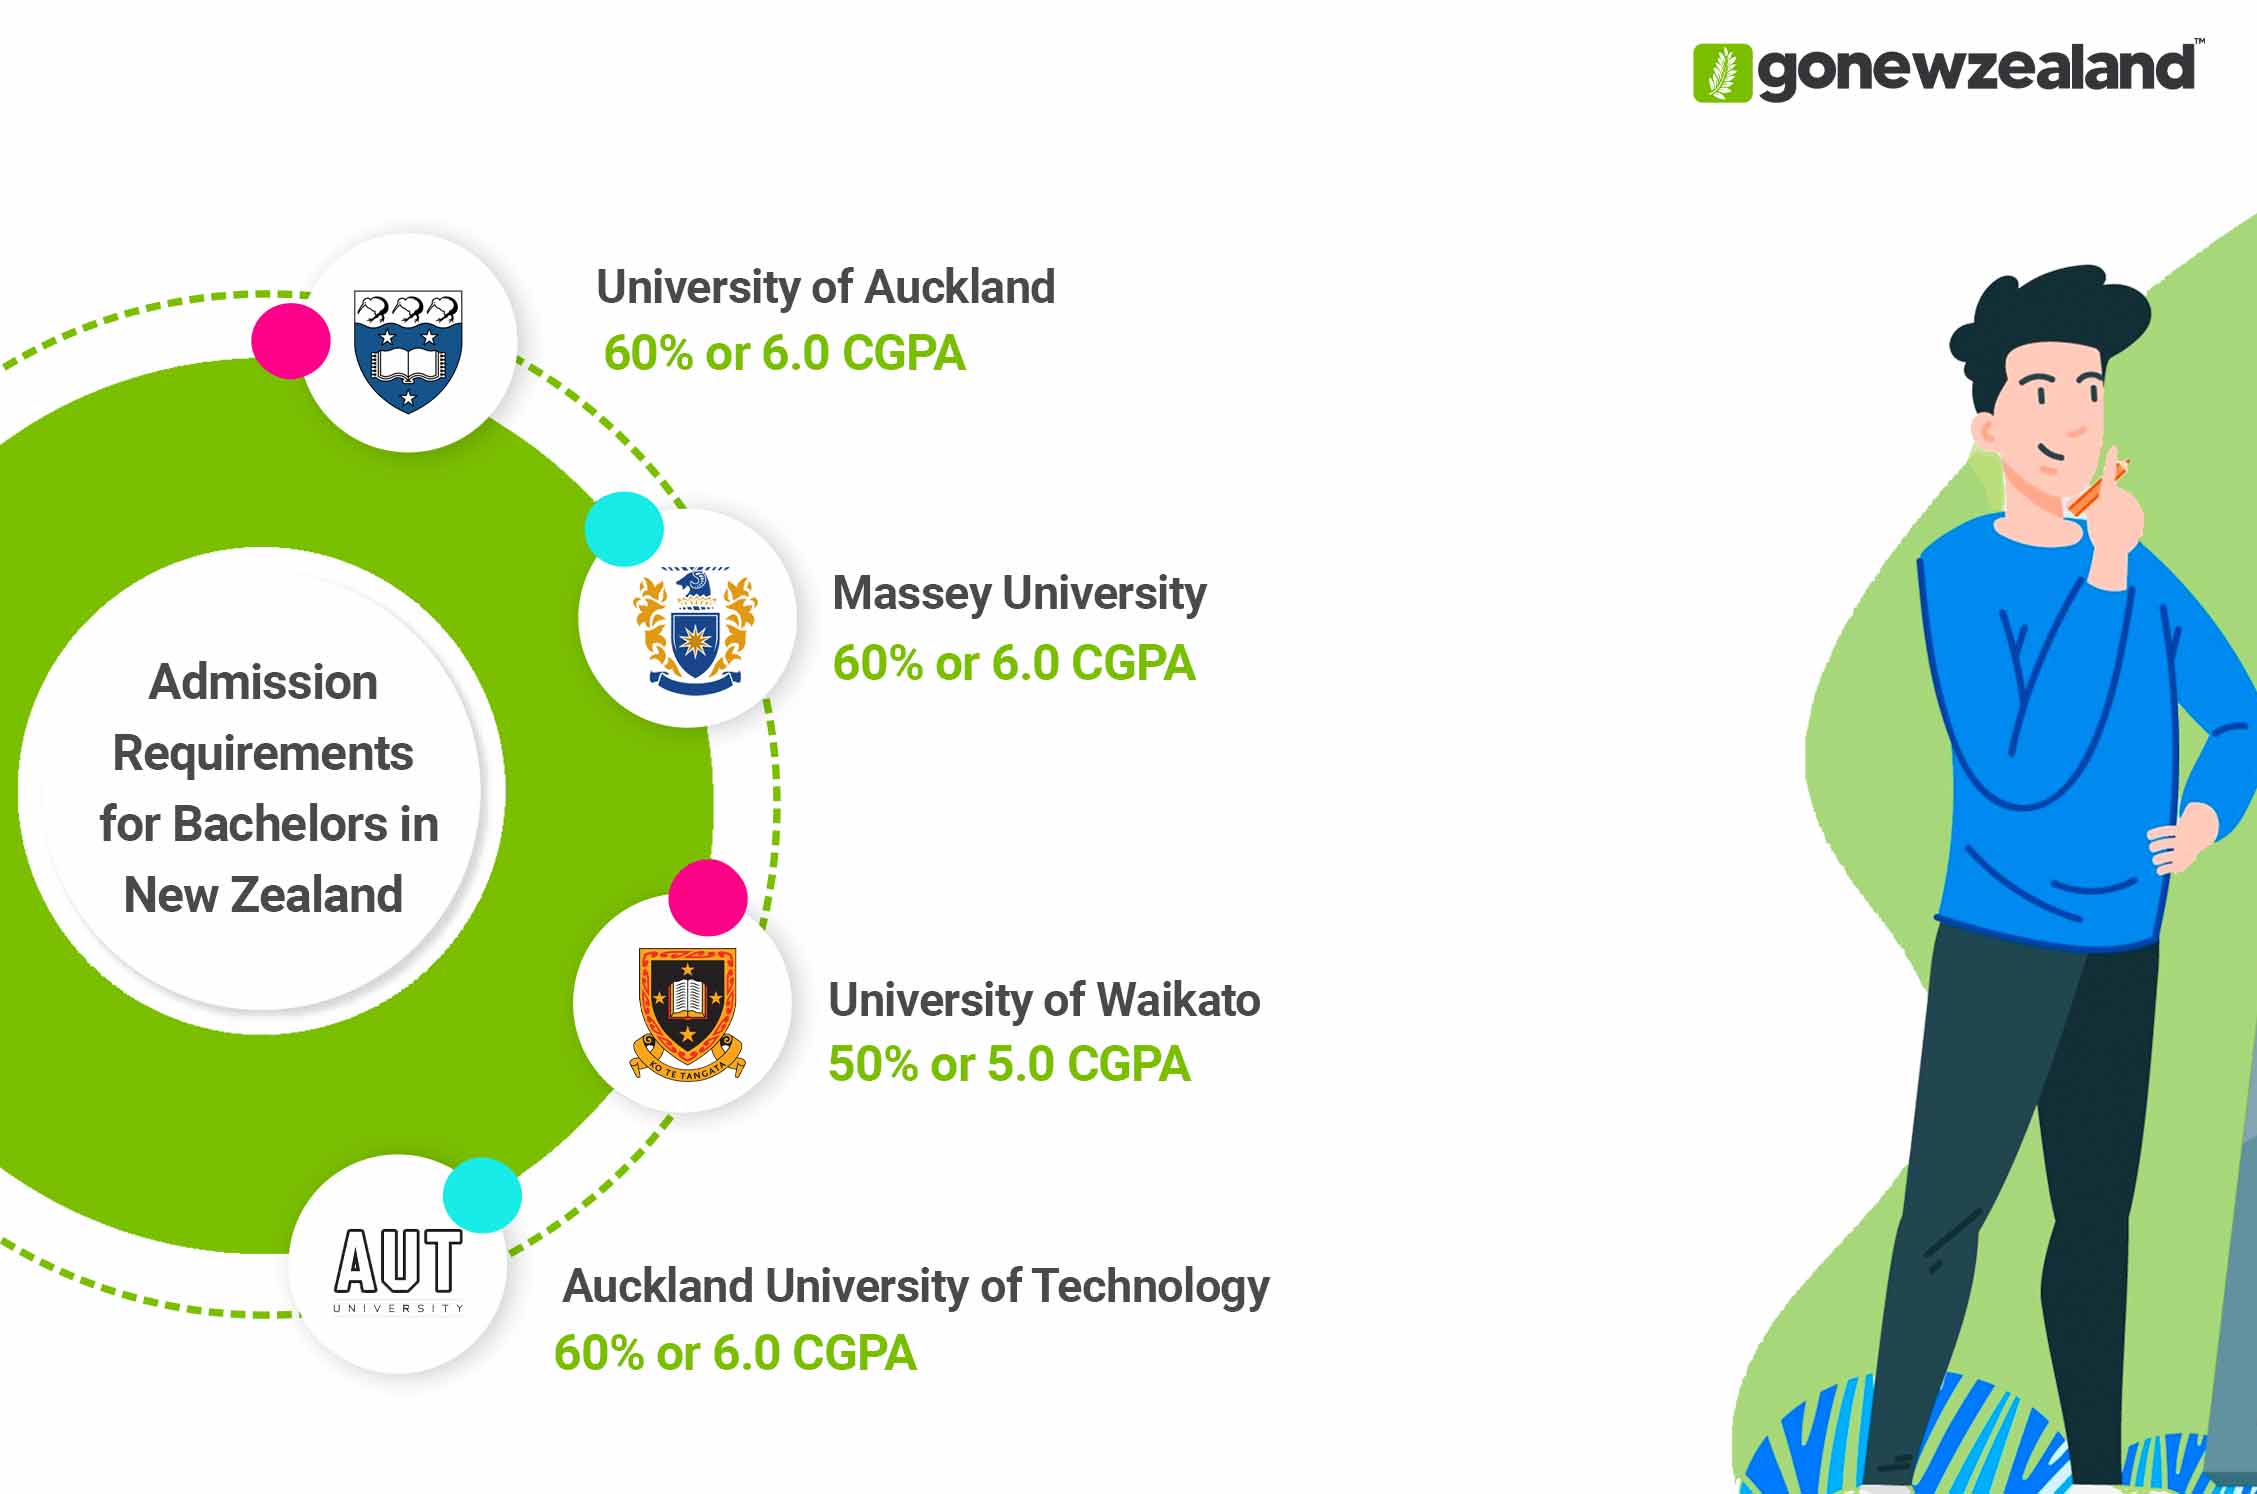 Bachelors in New Zealand Admission Requirements